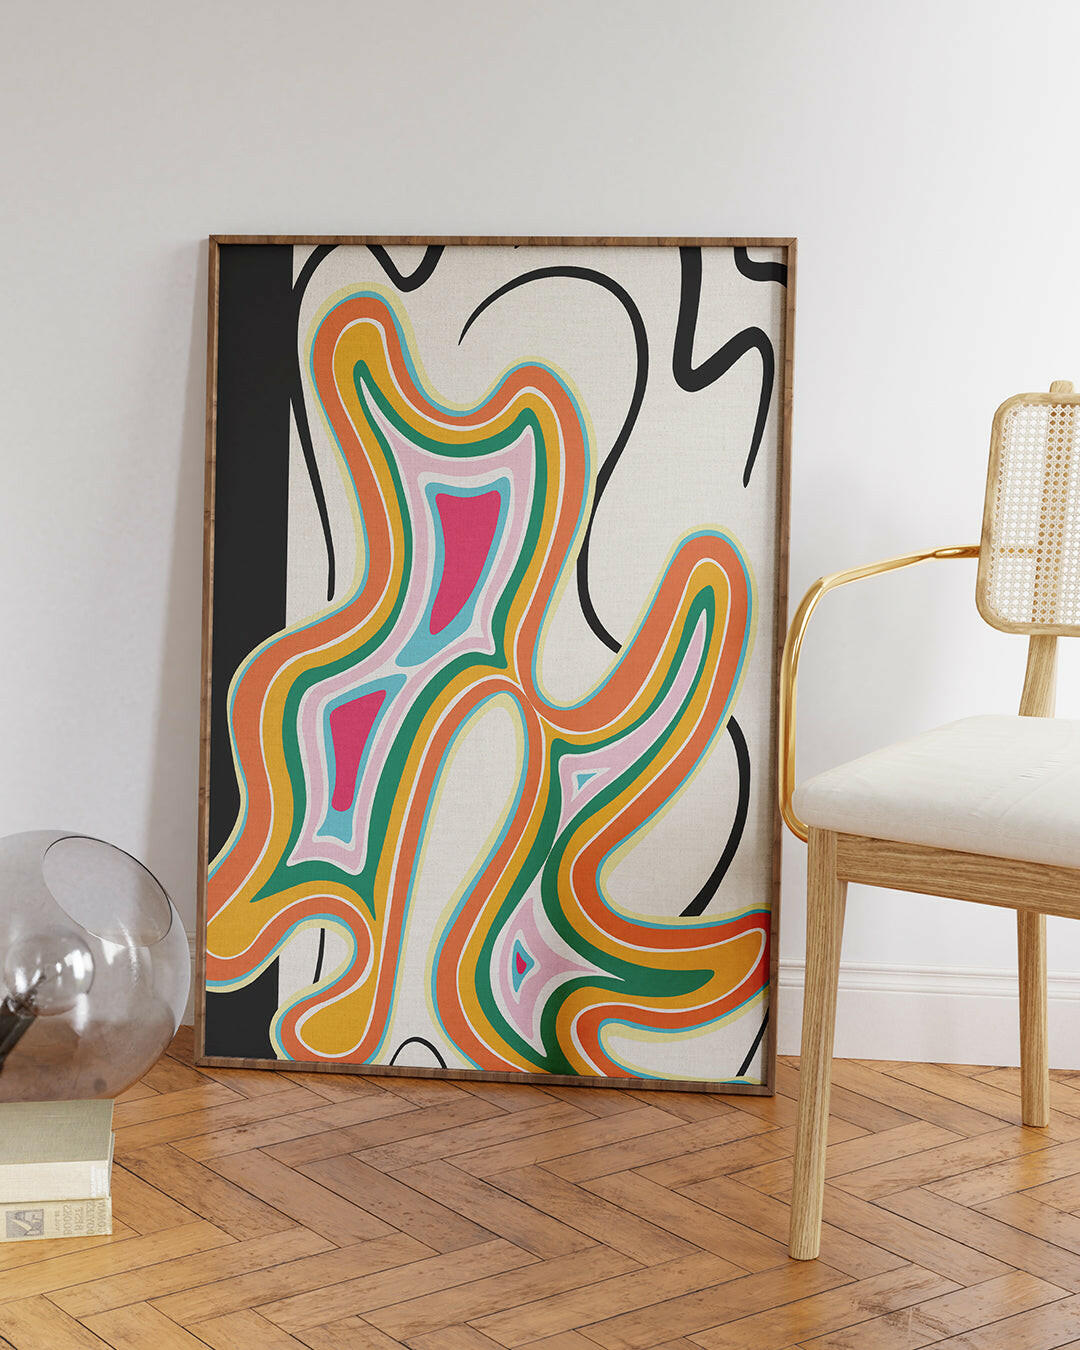 Abstract geometric design inspired by canyon layers with vibrant color bursts